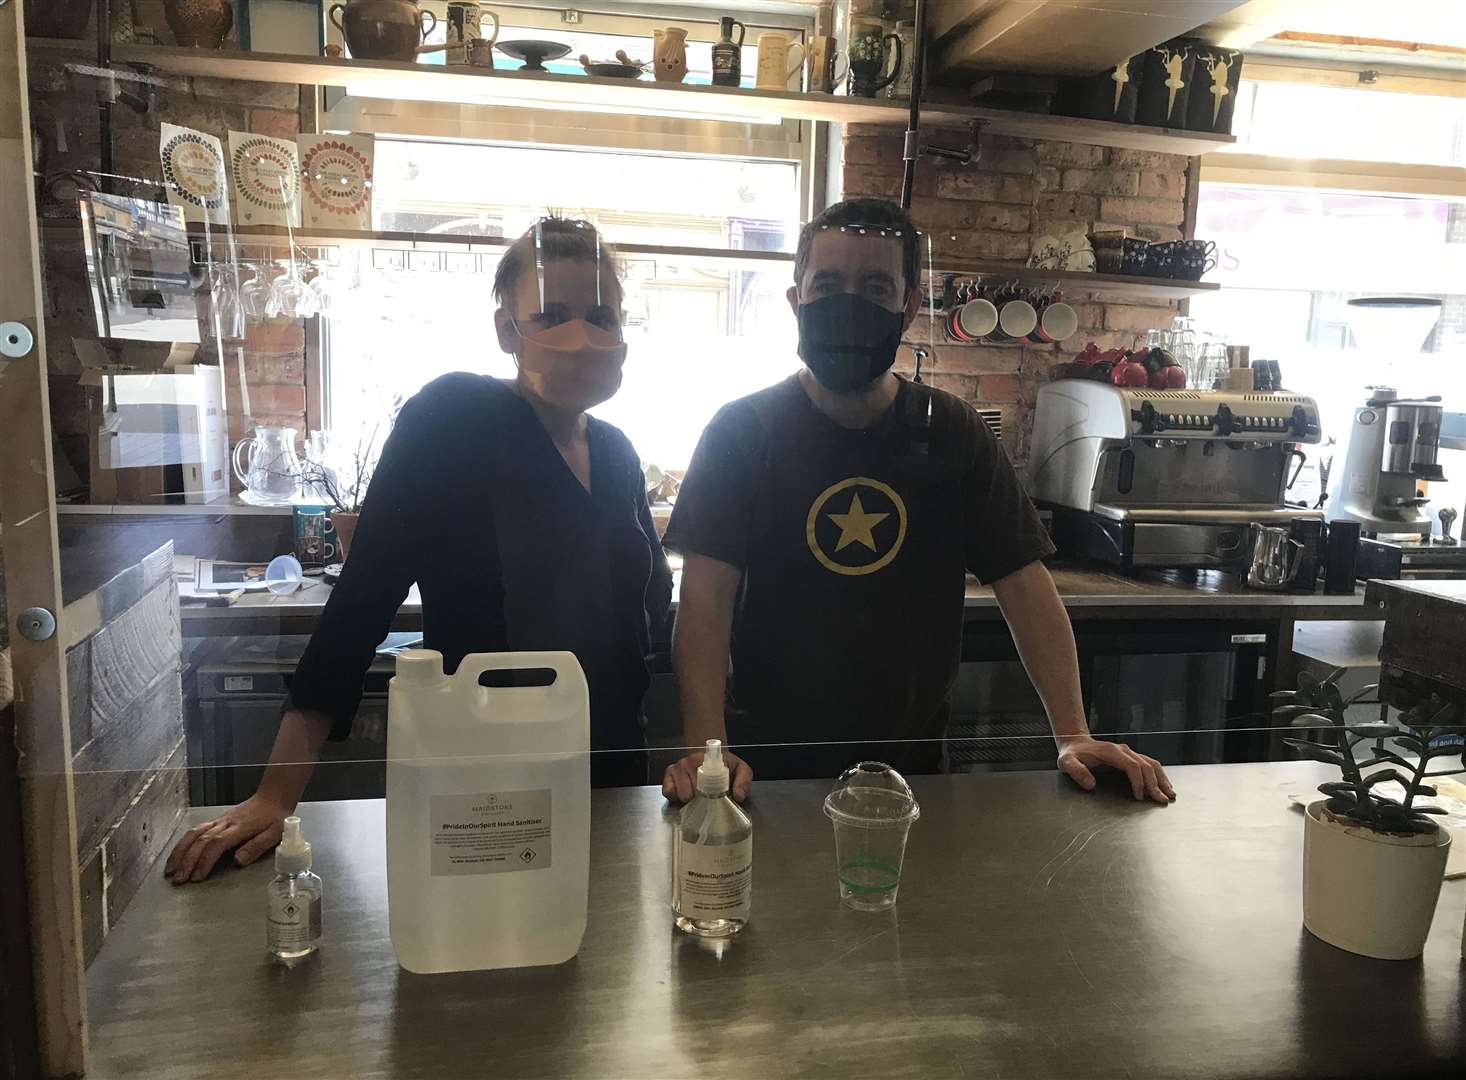 Sandra Lemke and George Spencer are preparing to open Matestone Coffee Bar, with facemasks and social distancing measures in place (36341095)